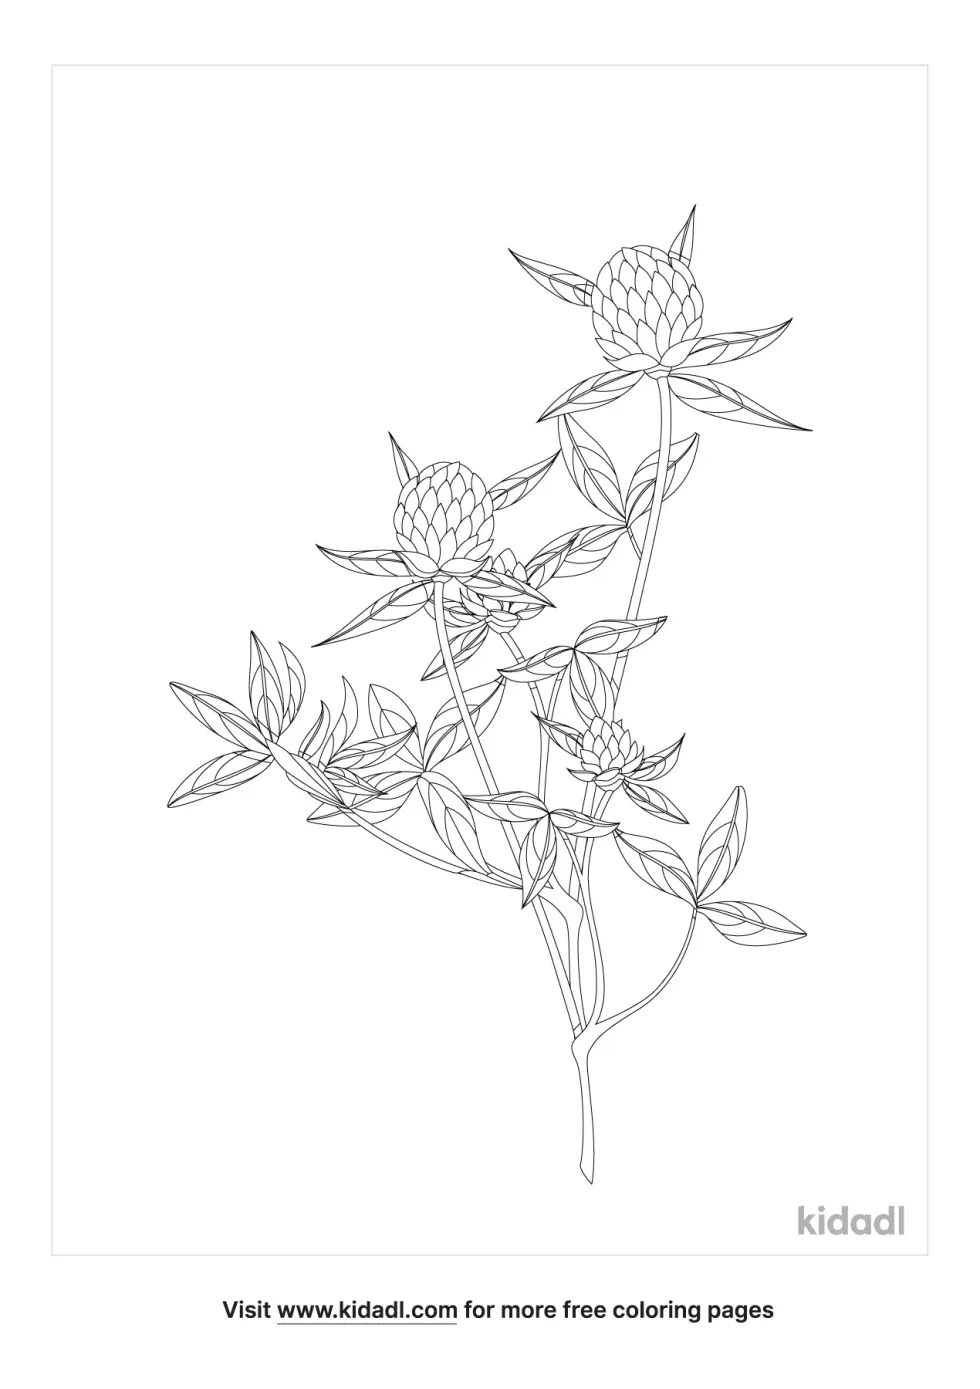 Red Clover Coloring Page